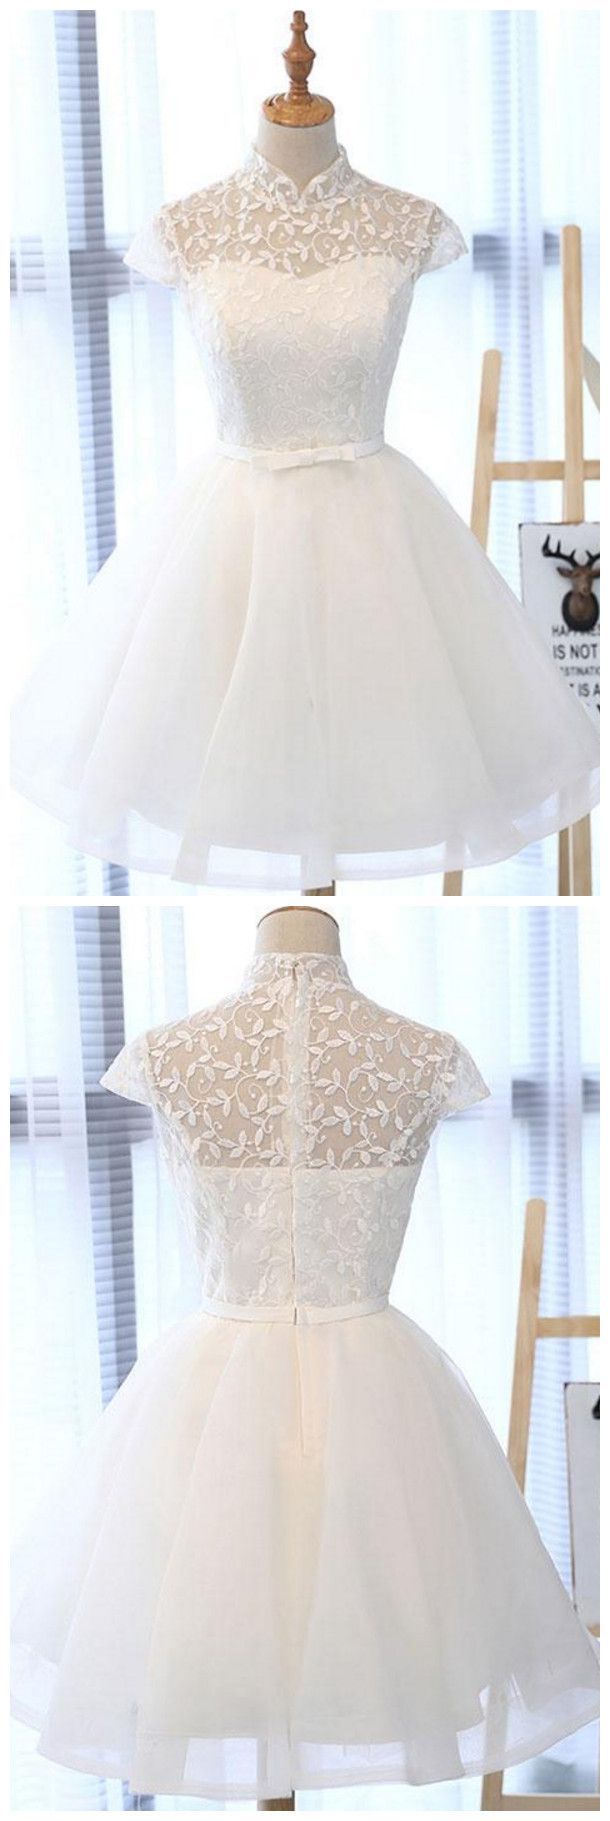 White Lace Short Prom Dress, White Homecoming Dress -   17 dress Cocktail white ideas